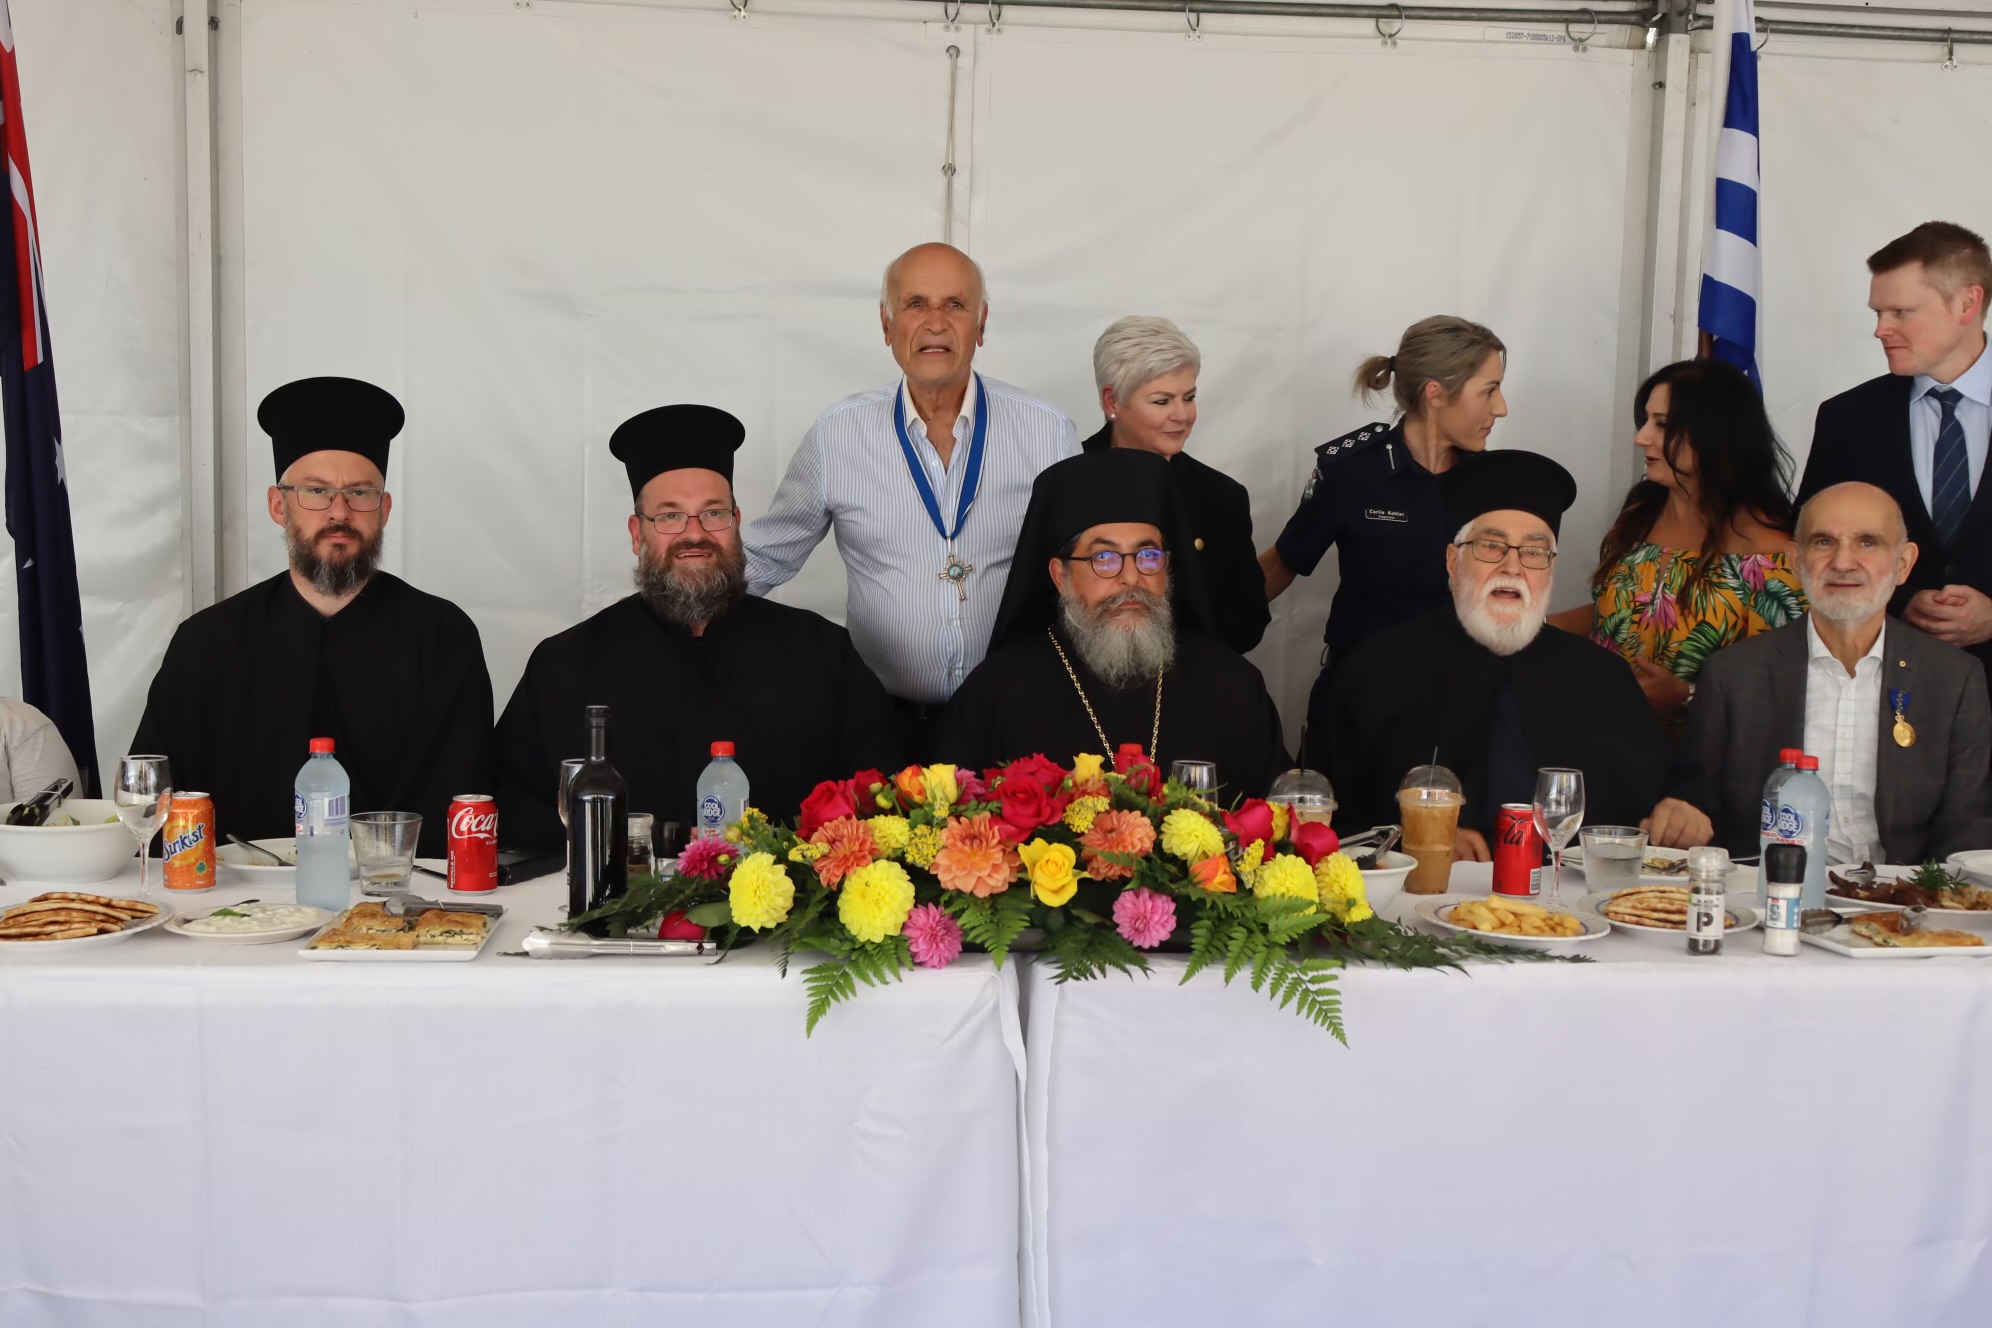 Melbourne: The culmination of the feast day celebrations at the Parish of St Haralambos, Templestowe